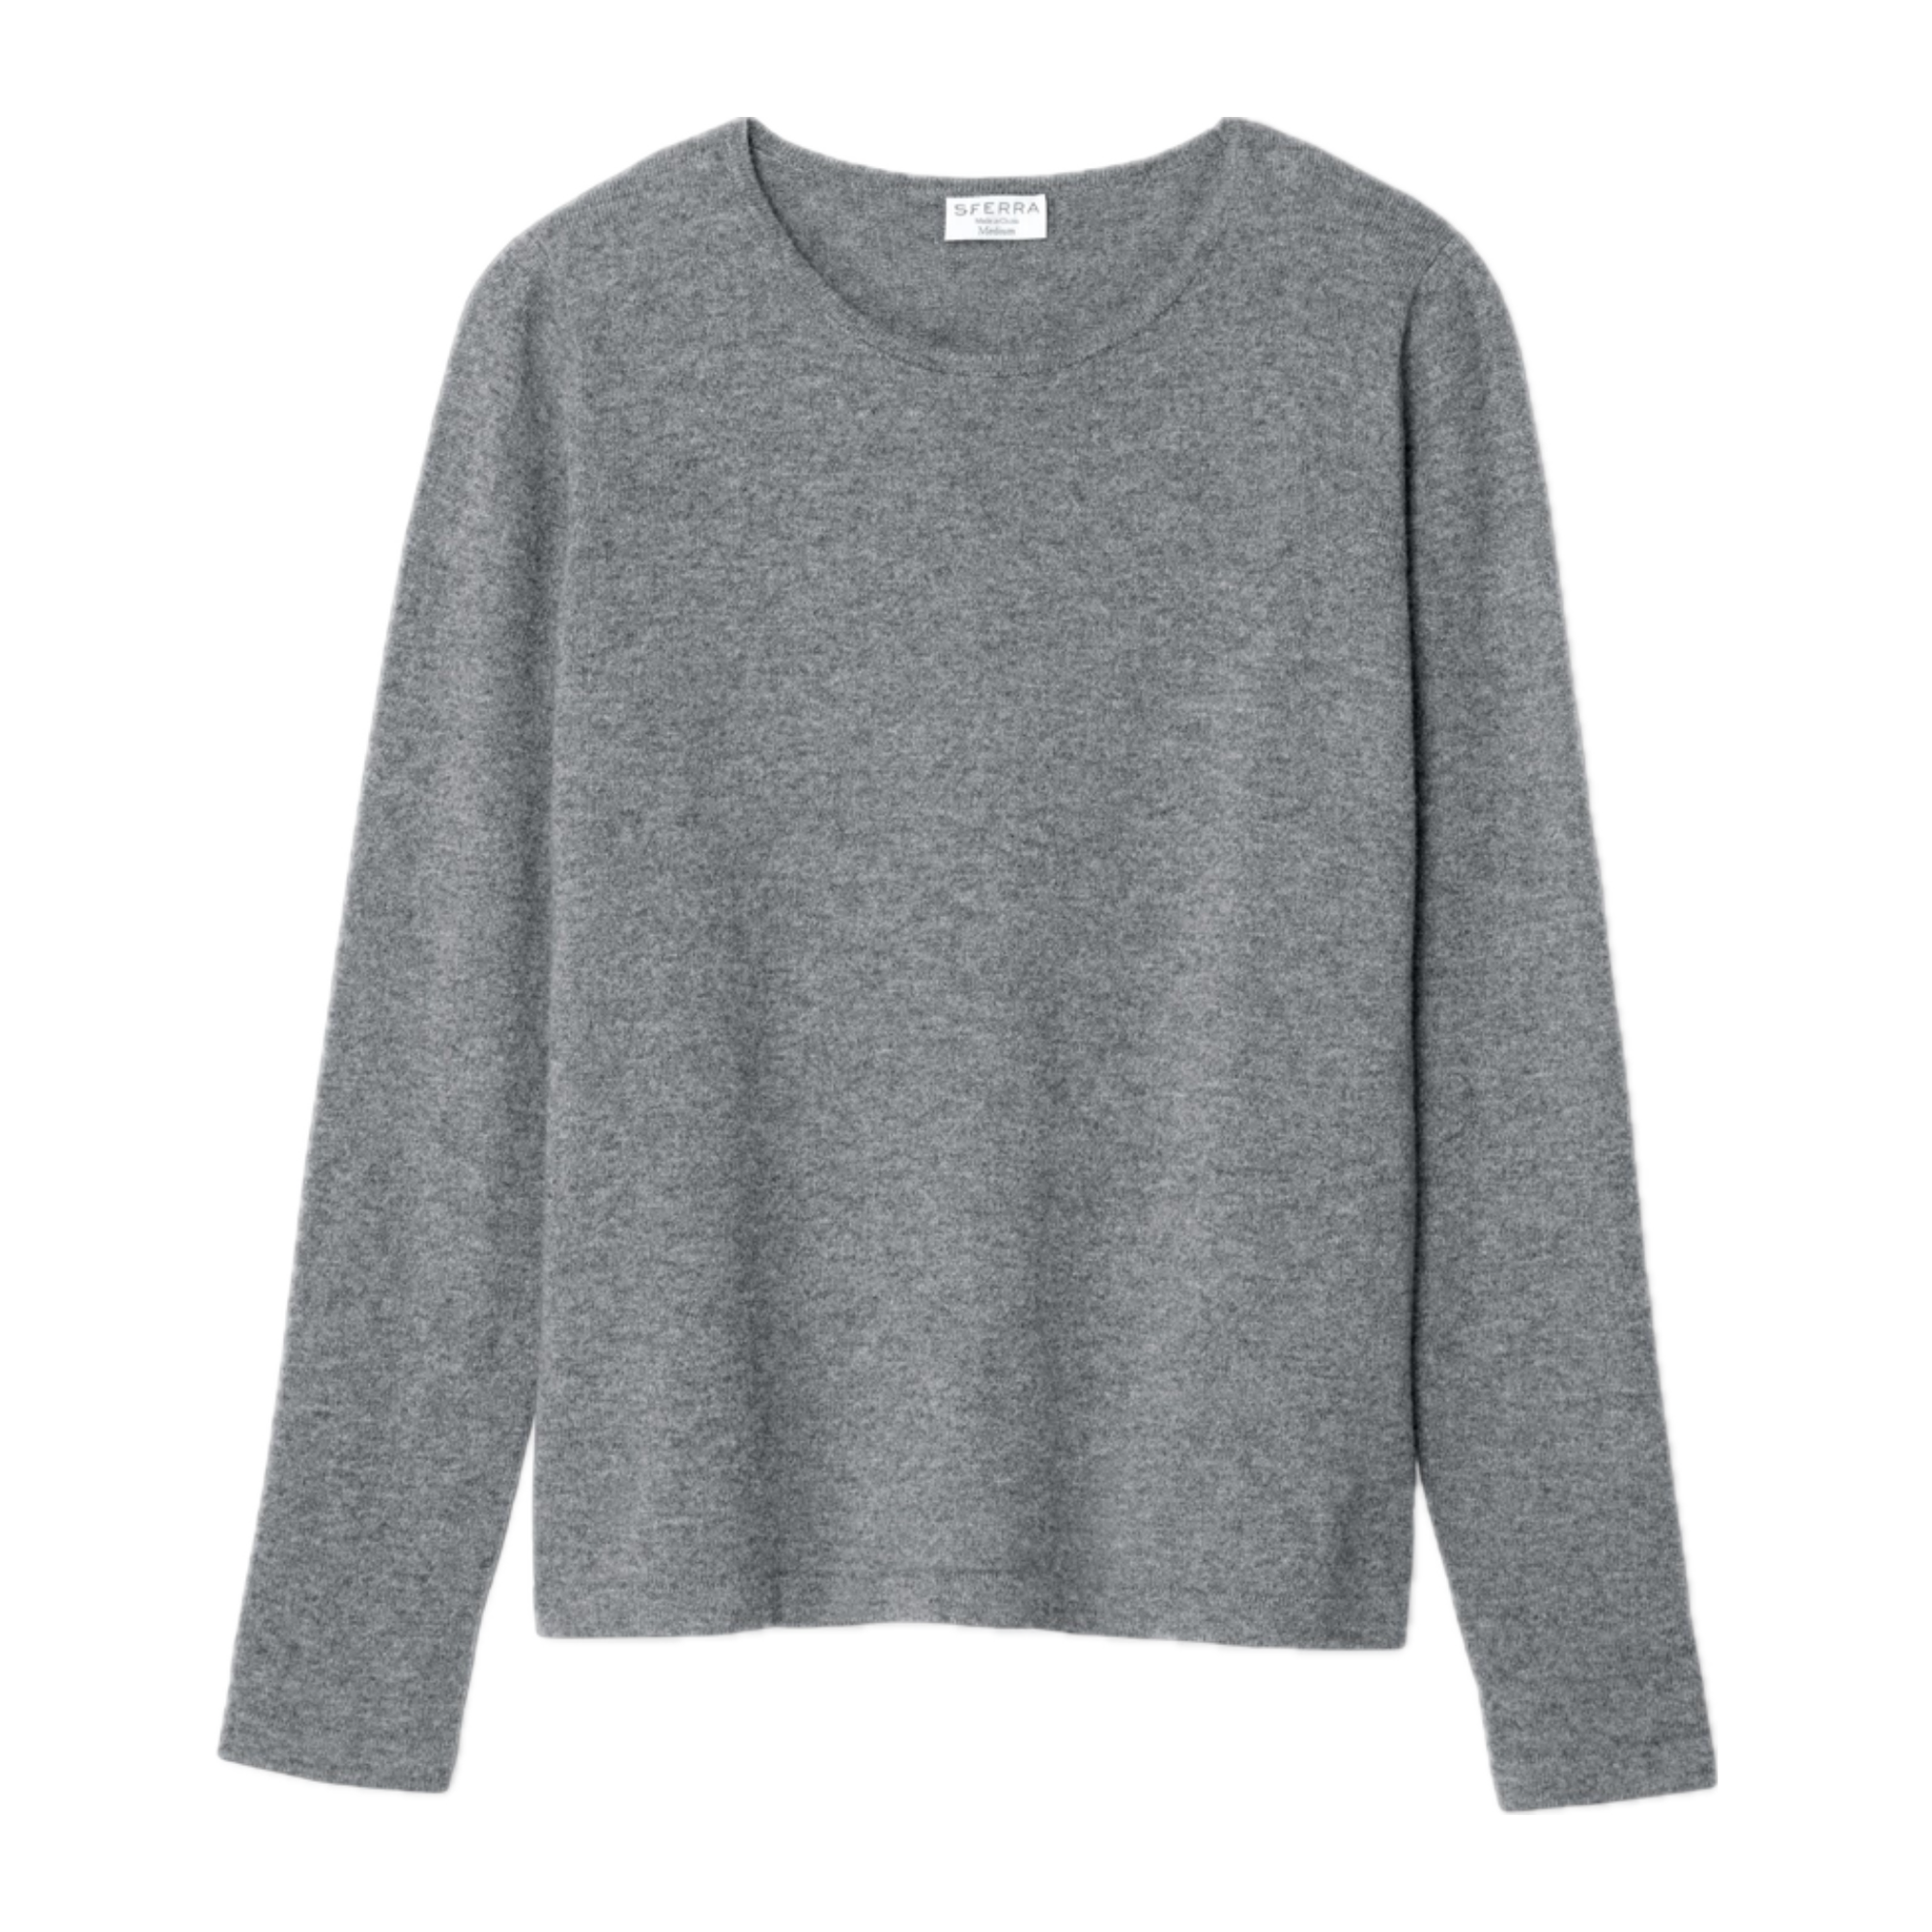 Grey Sferra Intimita Long Sleeve Top against a White Background